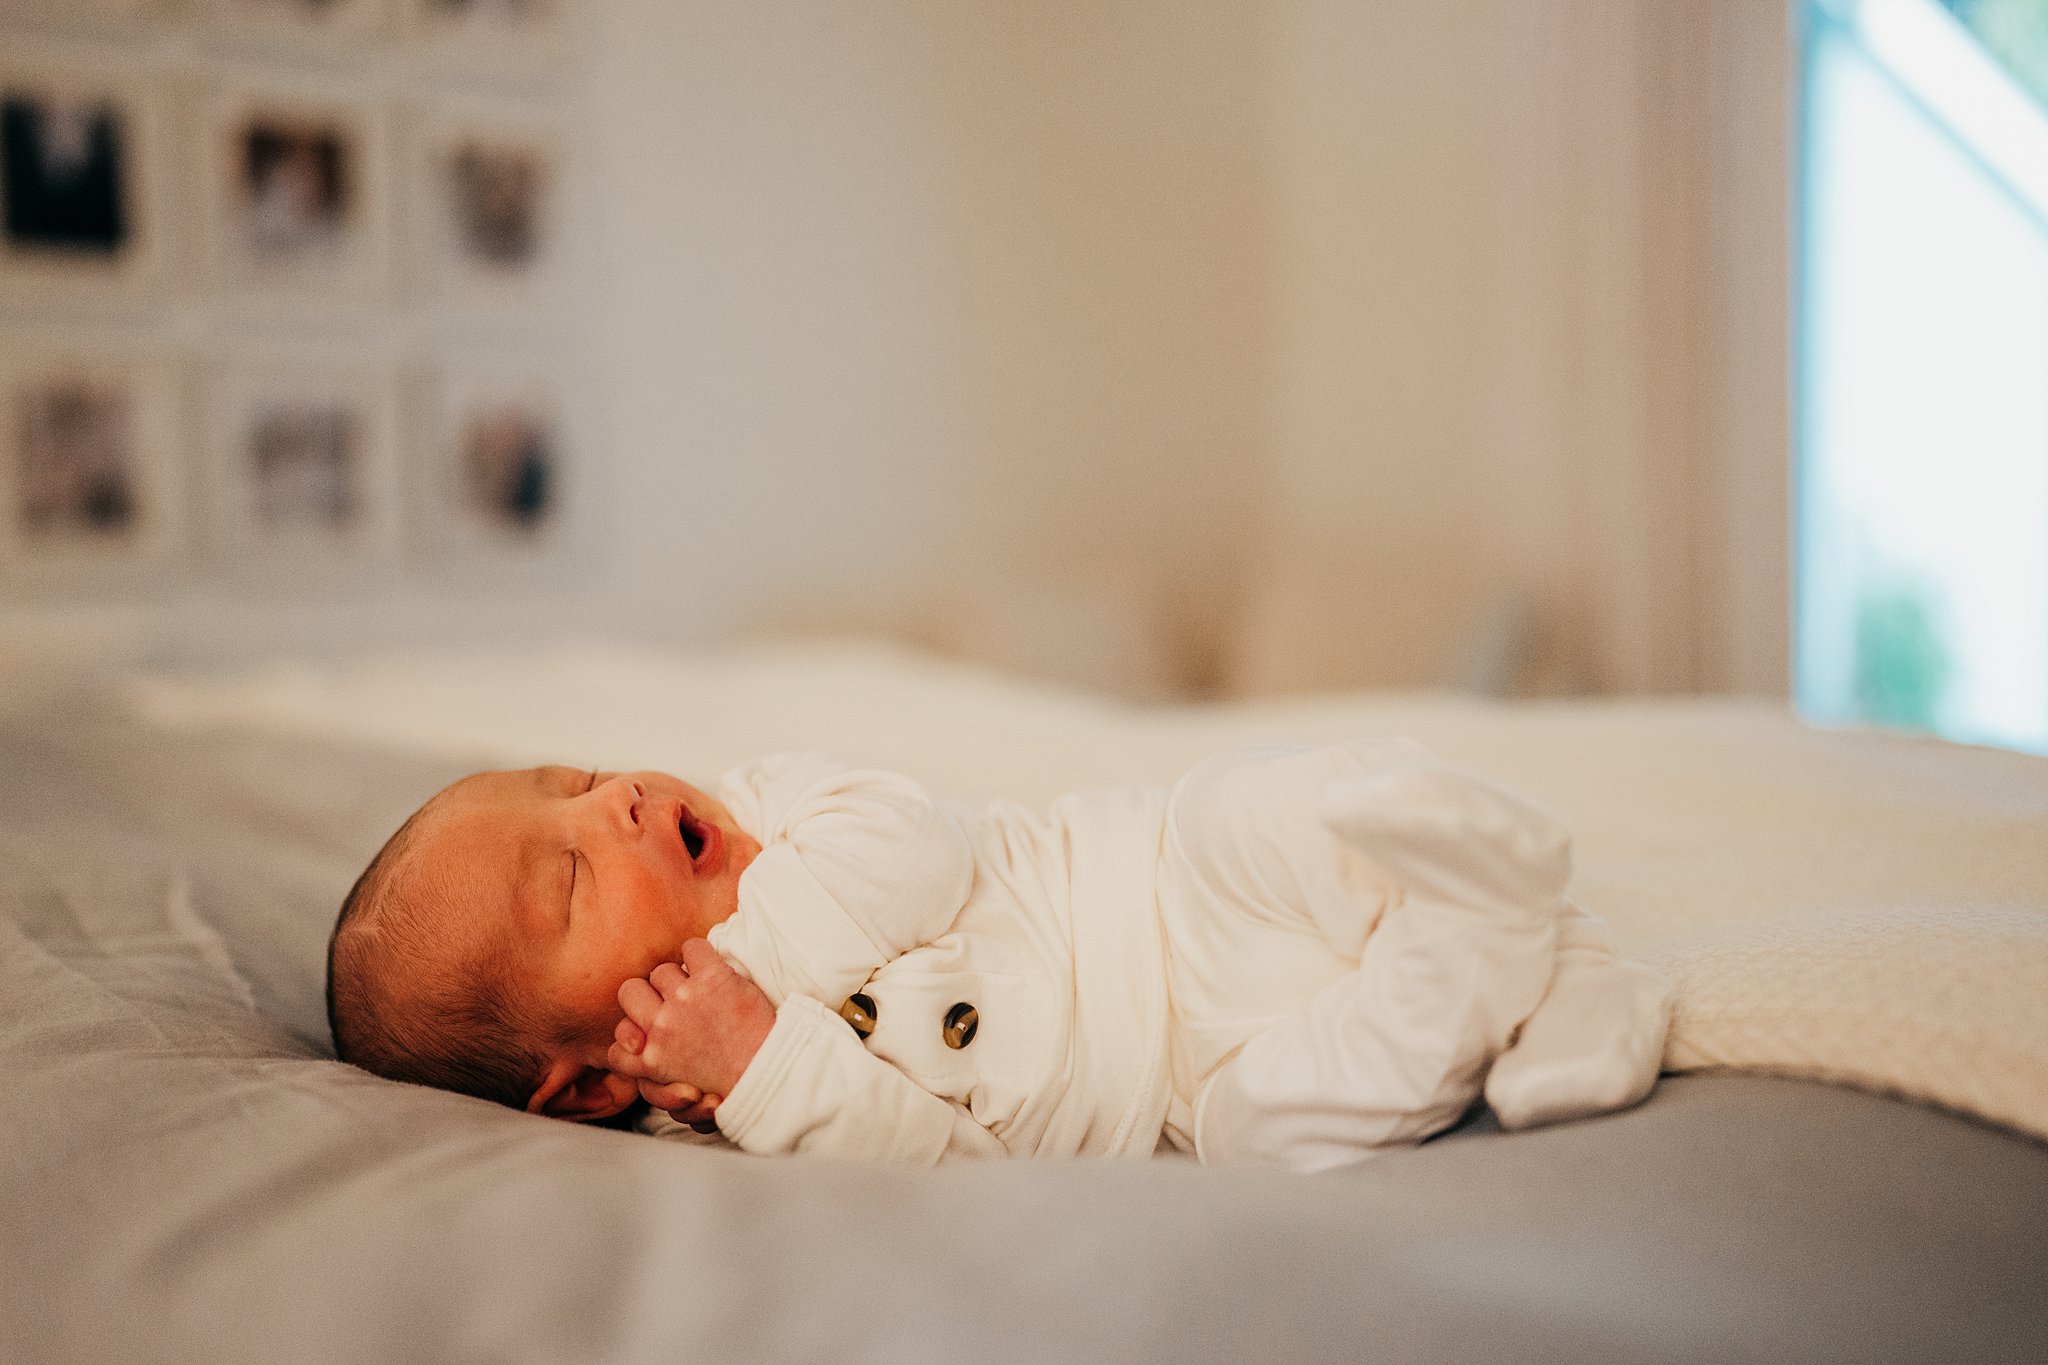 A sleeping newborn baby yawns while laying on a white onesie